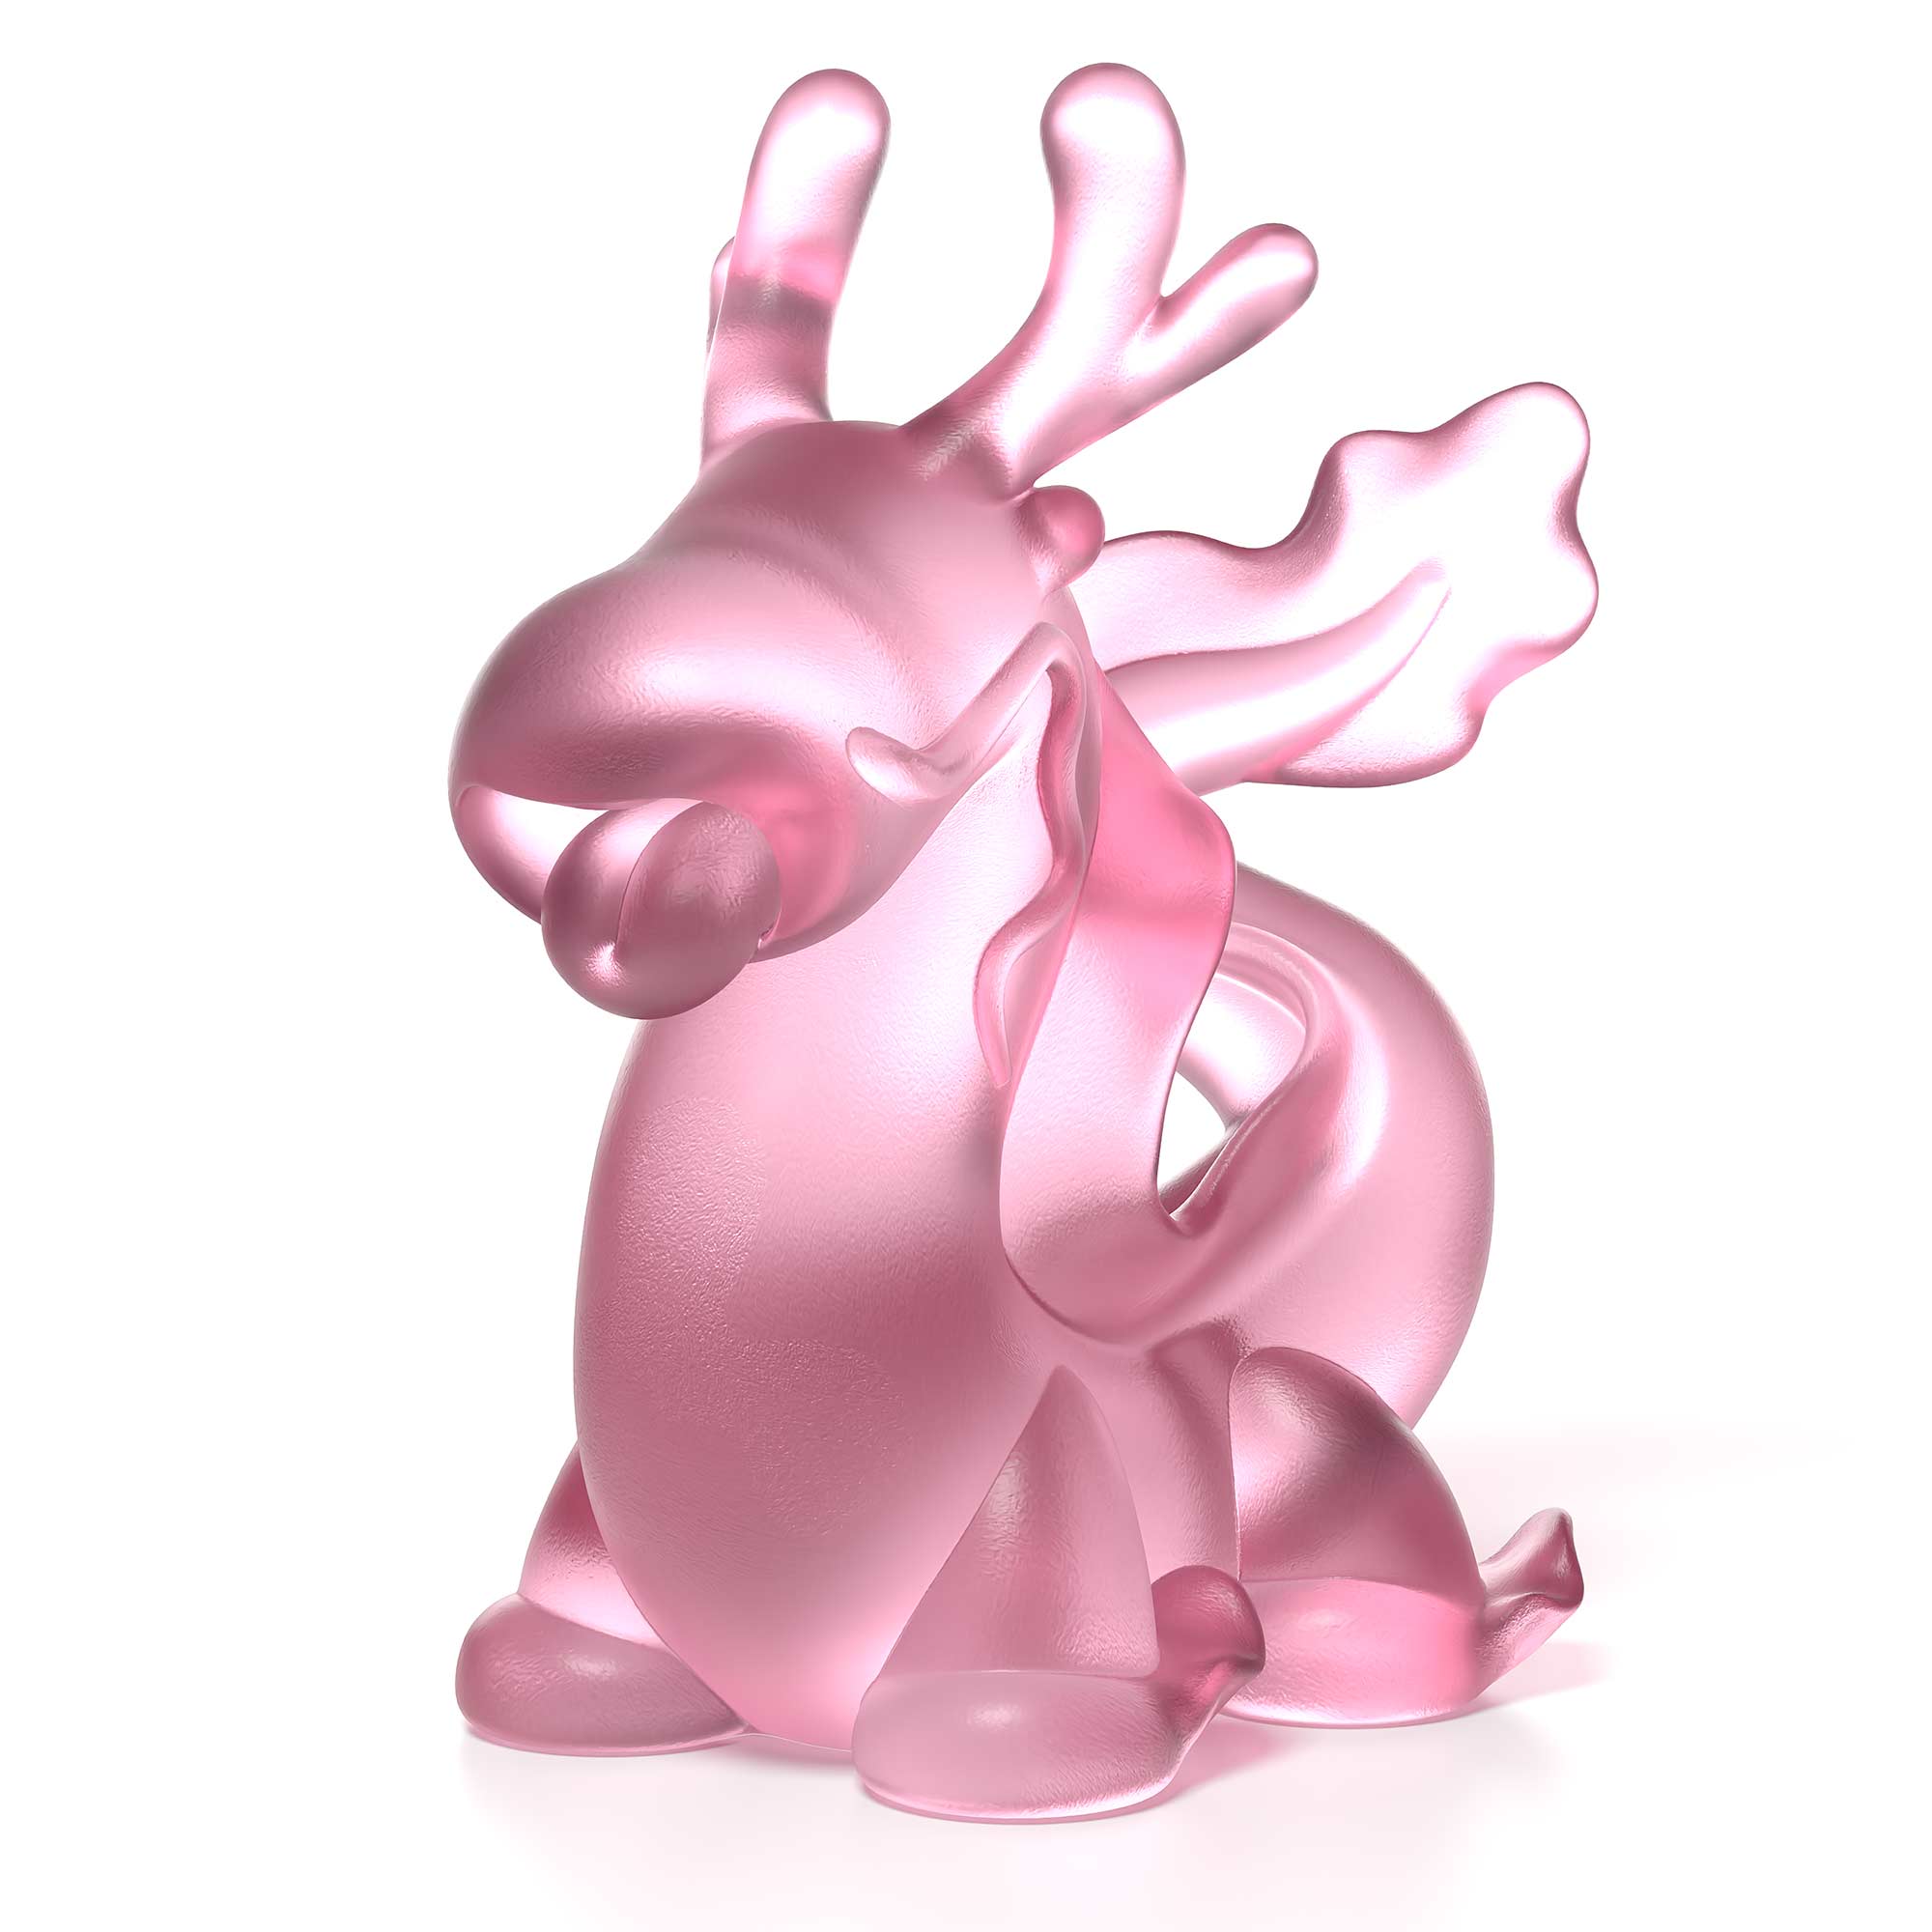 Dragon's Breath pink crystal sculpture the size is  16 cm height, by Ferdi B Dick,  Limited edition of 50